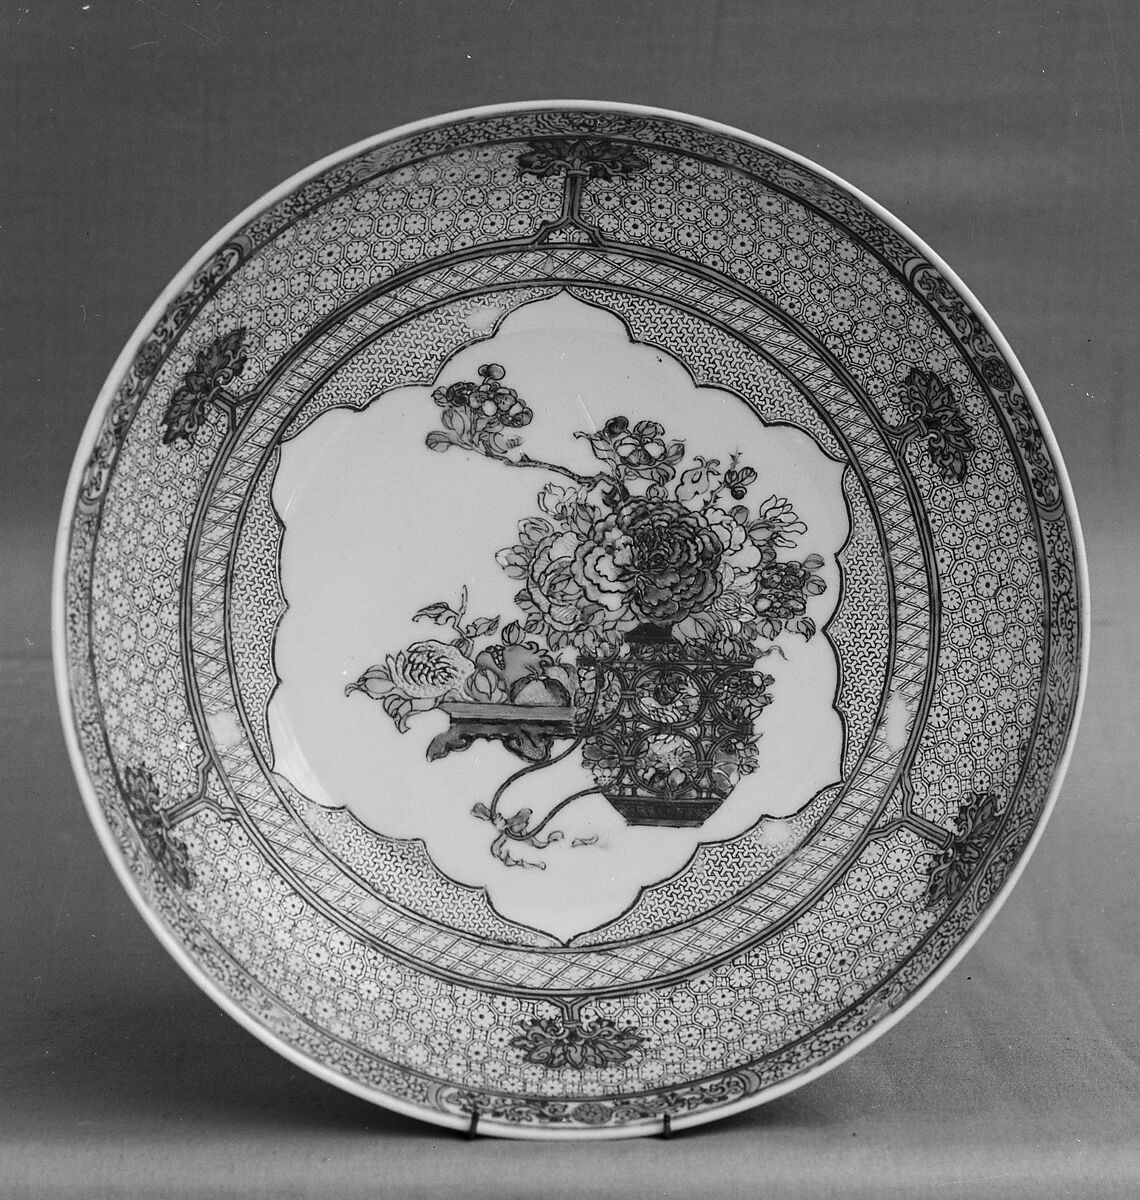 Plate, Porcelain painted in overglaze famille rose enamels, China 